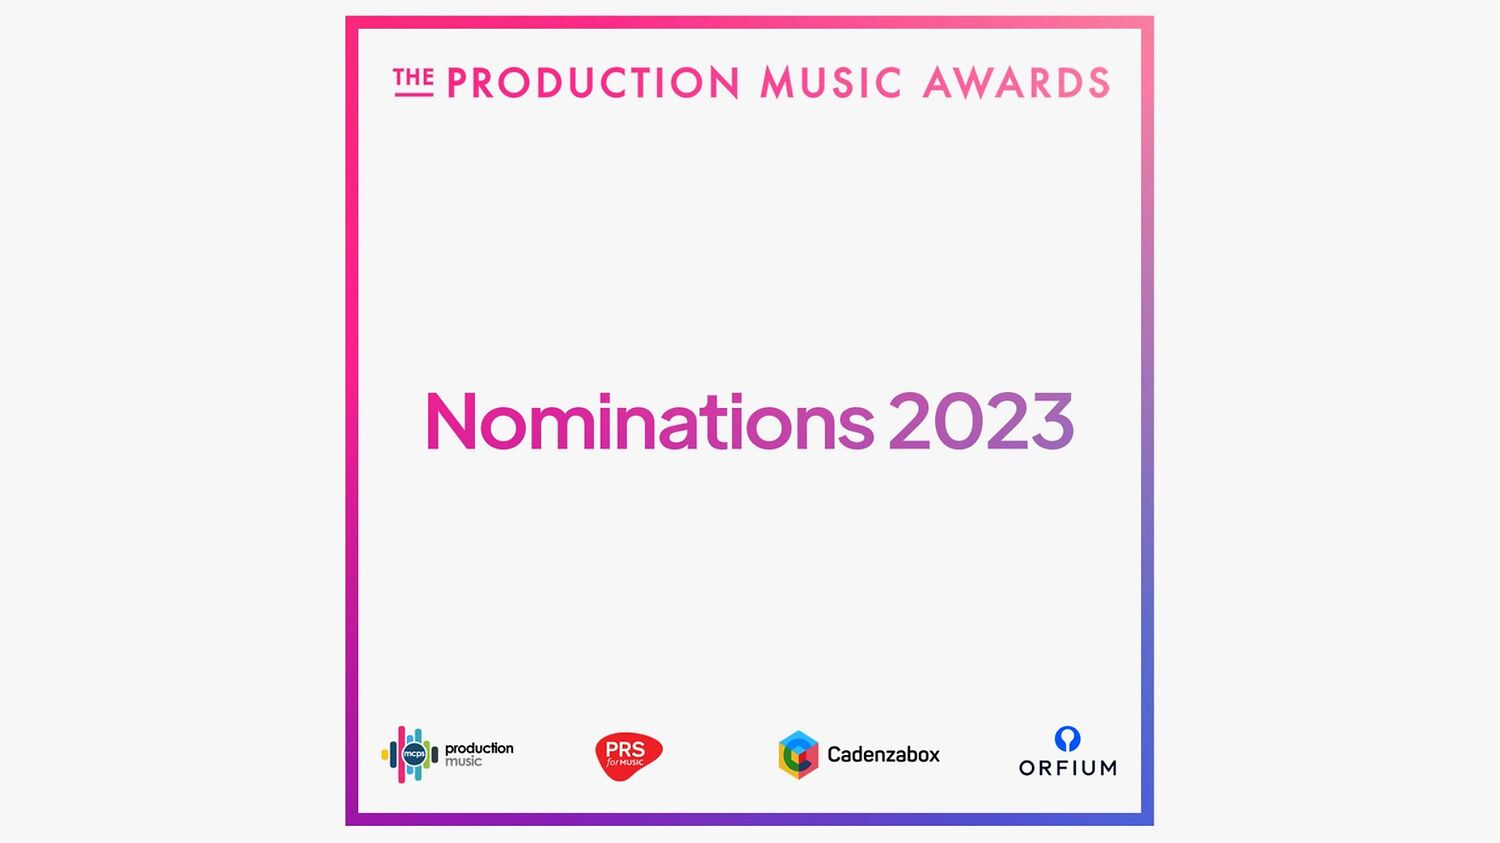 Production Music Awards announces nominations